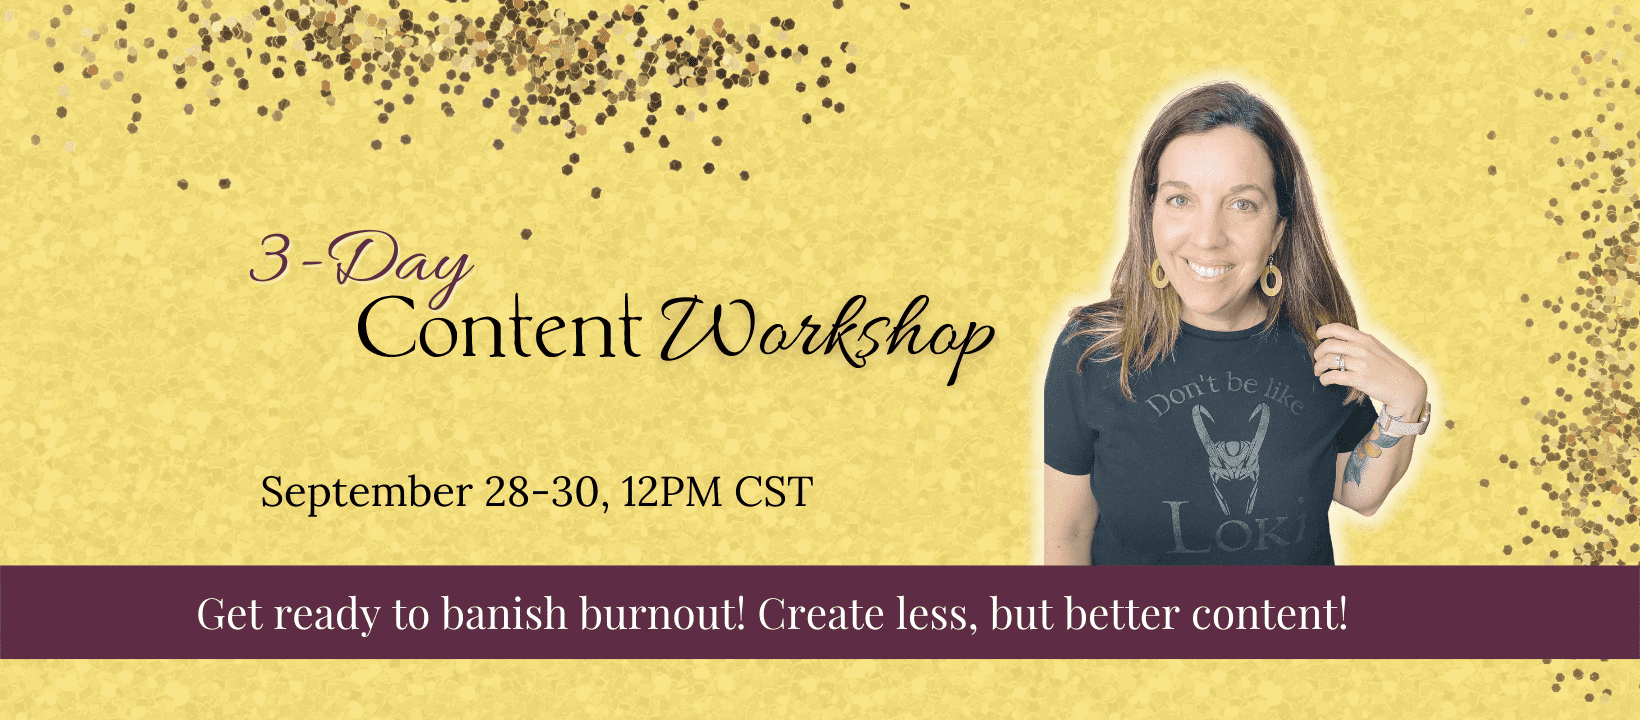 3-day content workshop, September 28-30, 2022, 12PM CST